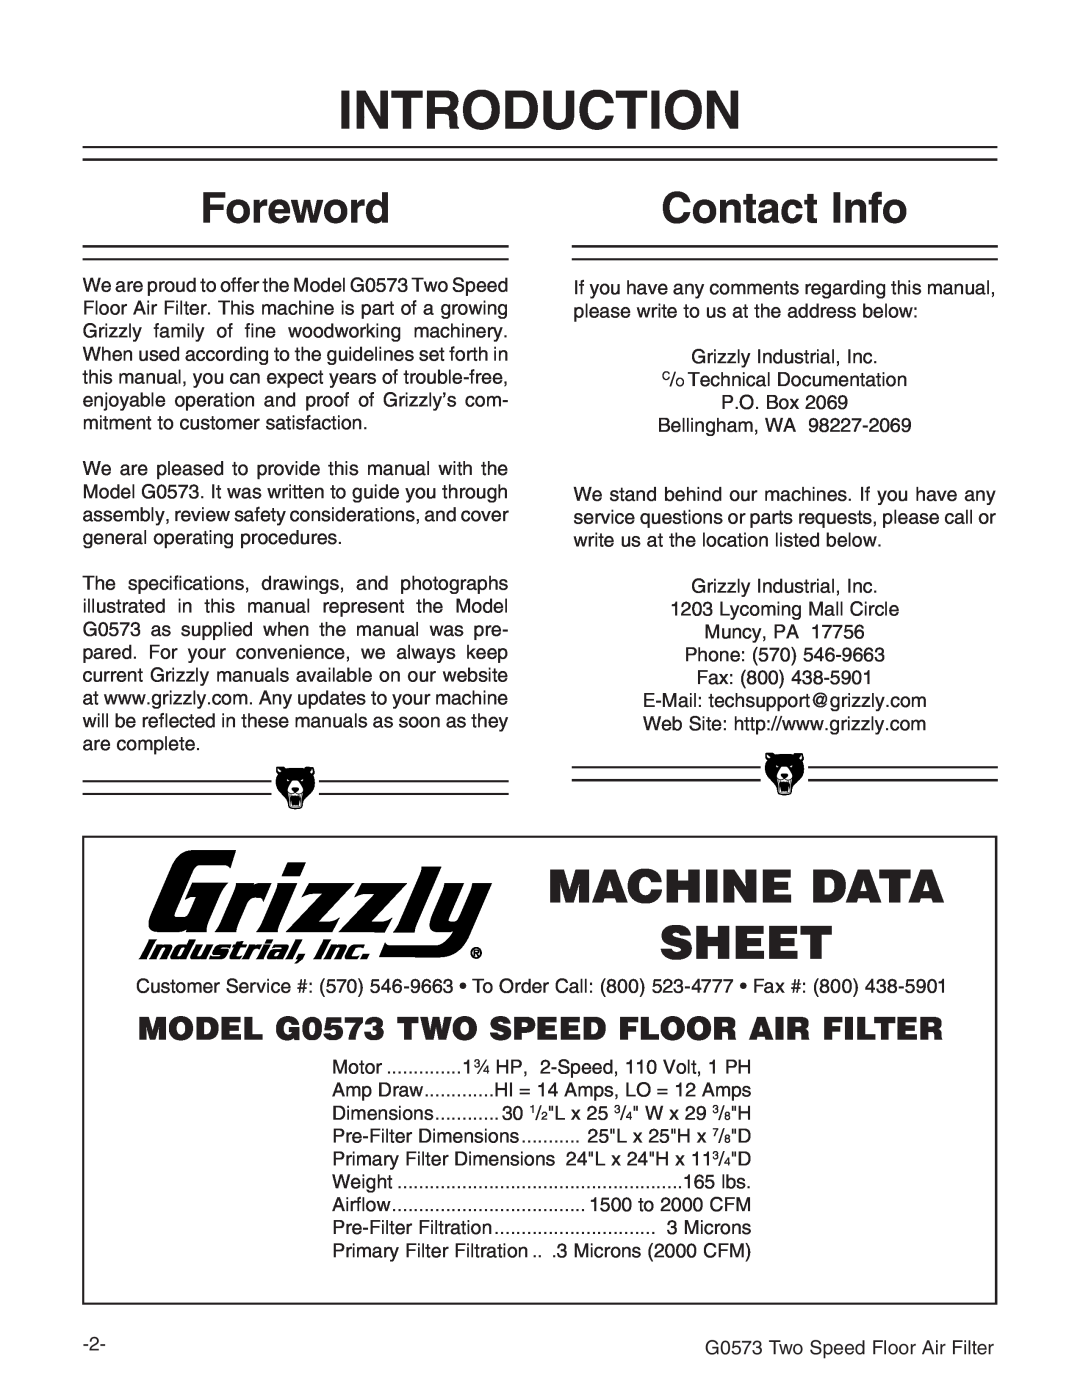 Grizzly Introduction, Foreword, Contact Info, MODEL G0573 TWO SPEED FLOOR AIR FILTER, Machine Data Sheet 